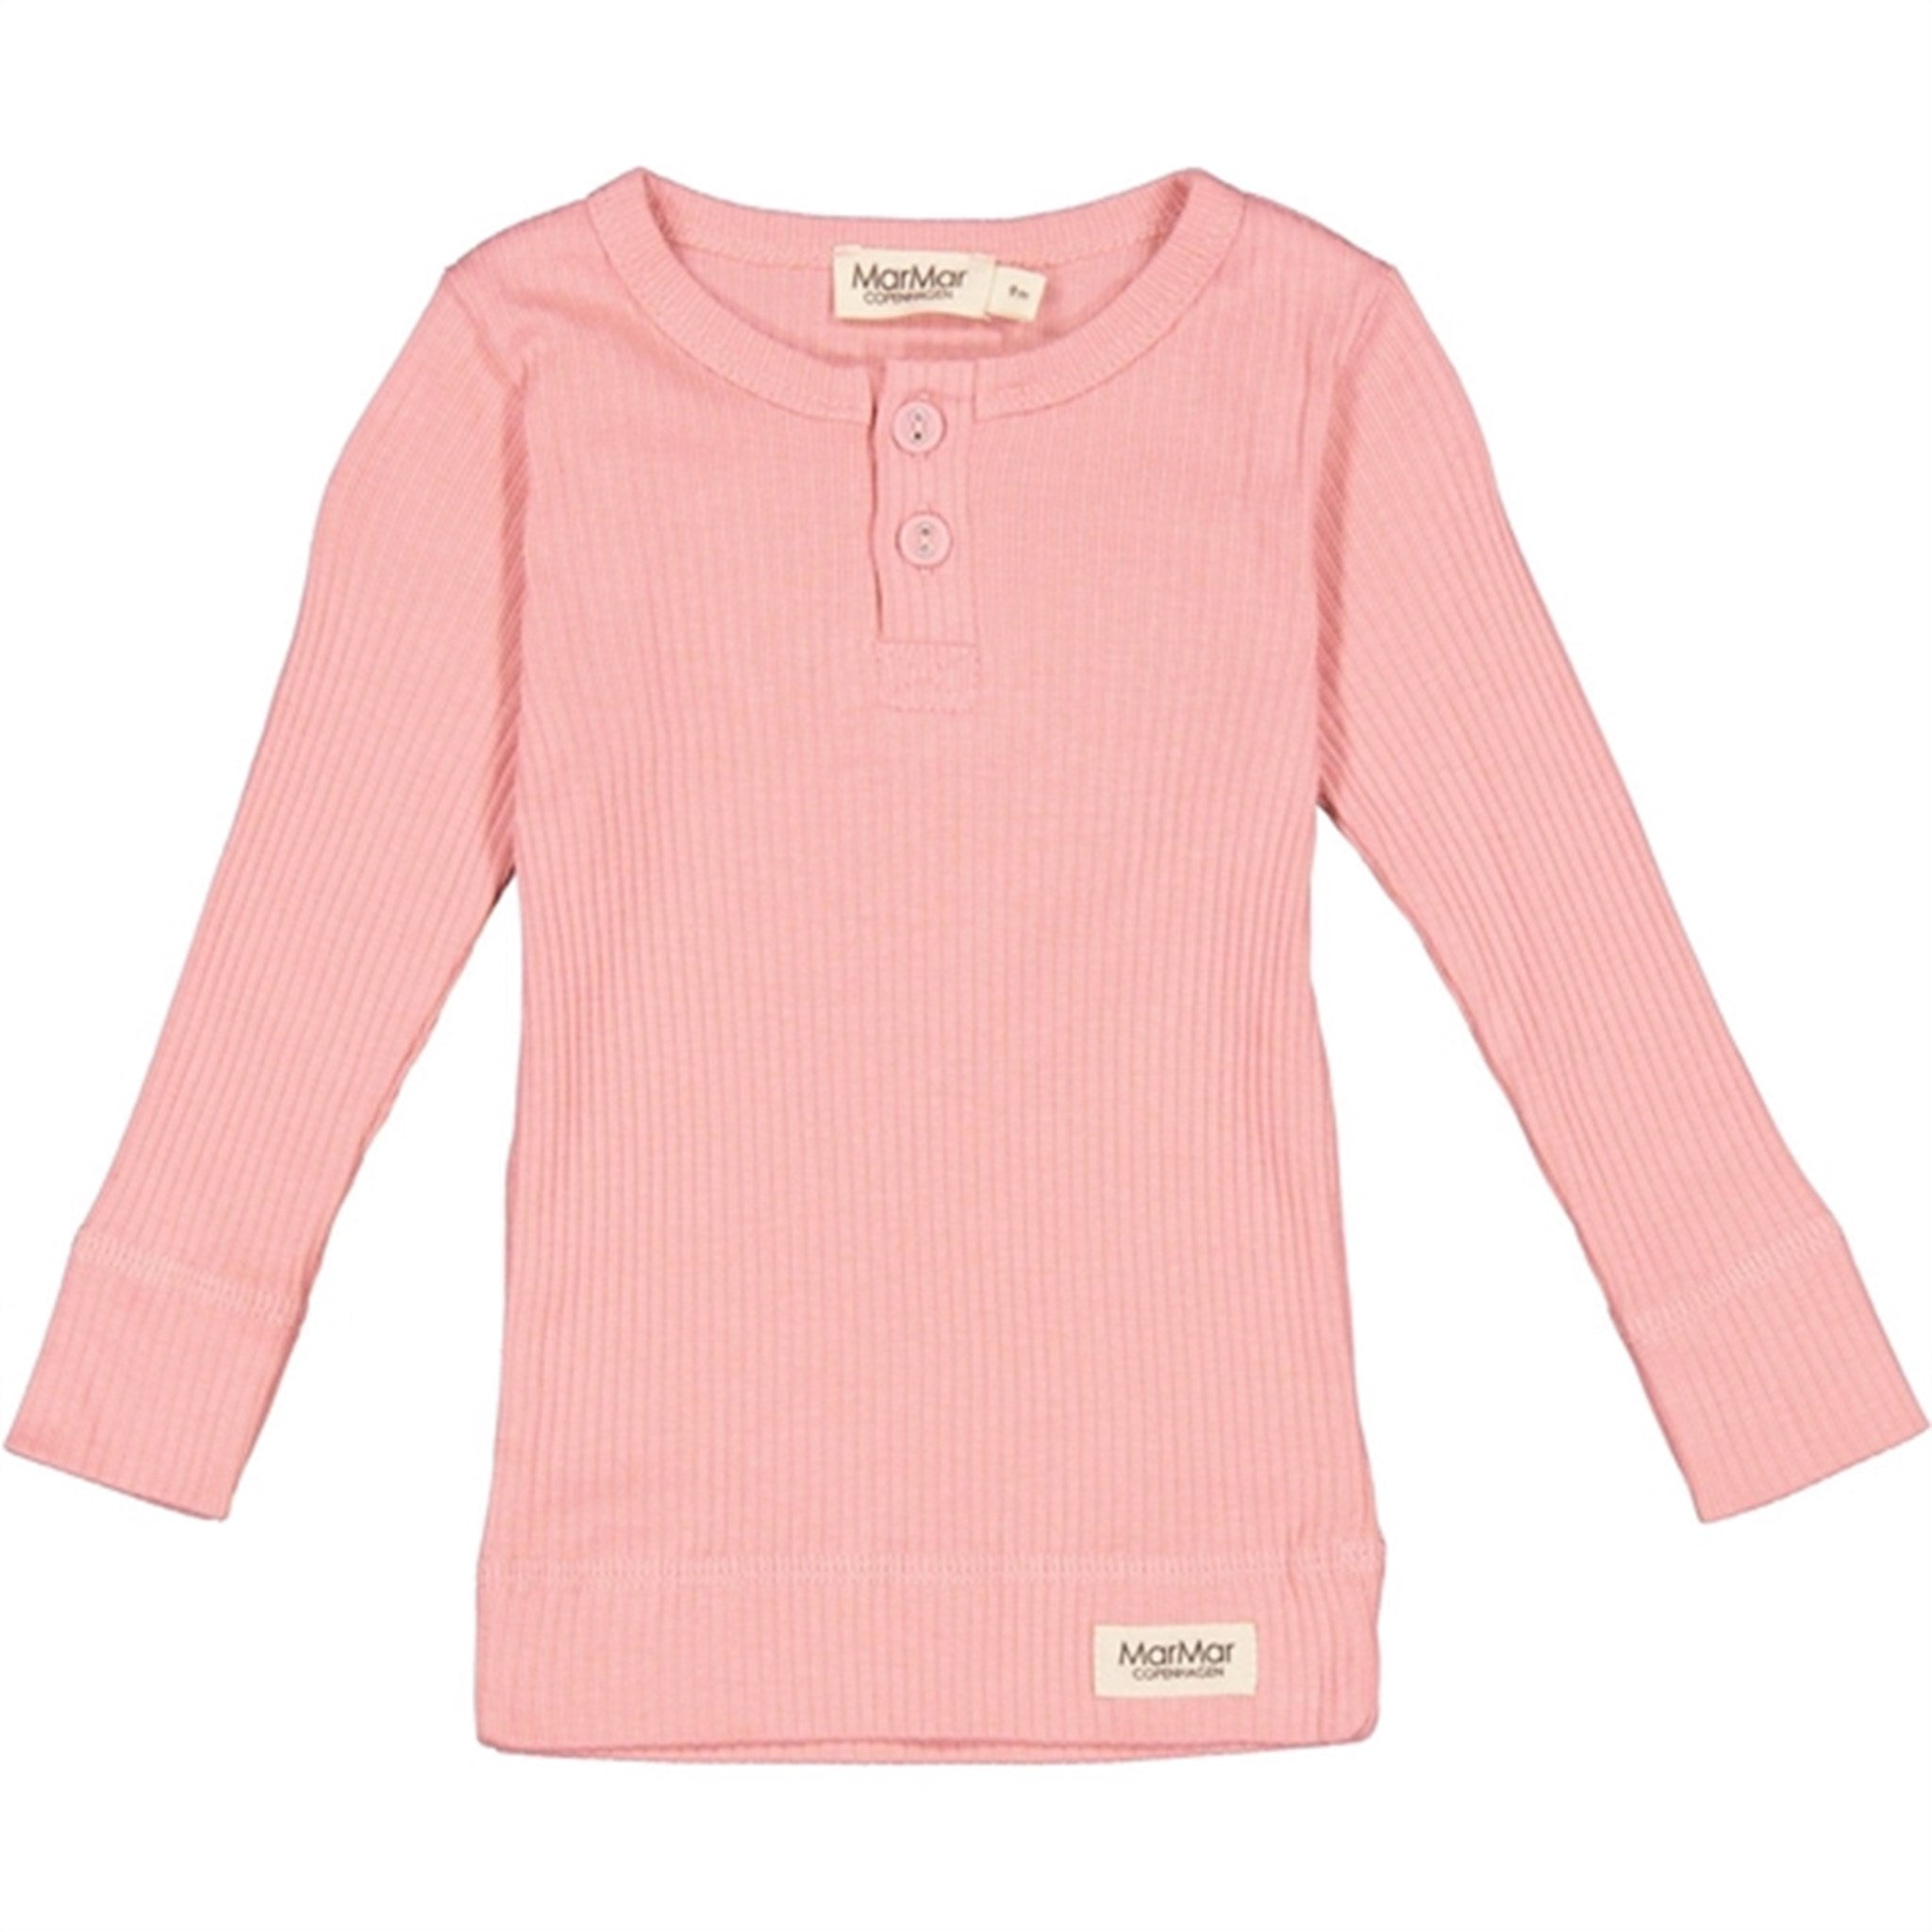 MarMar Modal Pink Delight Blouse